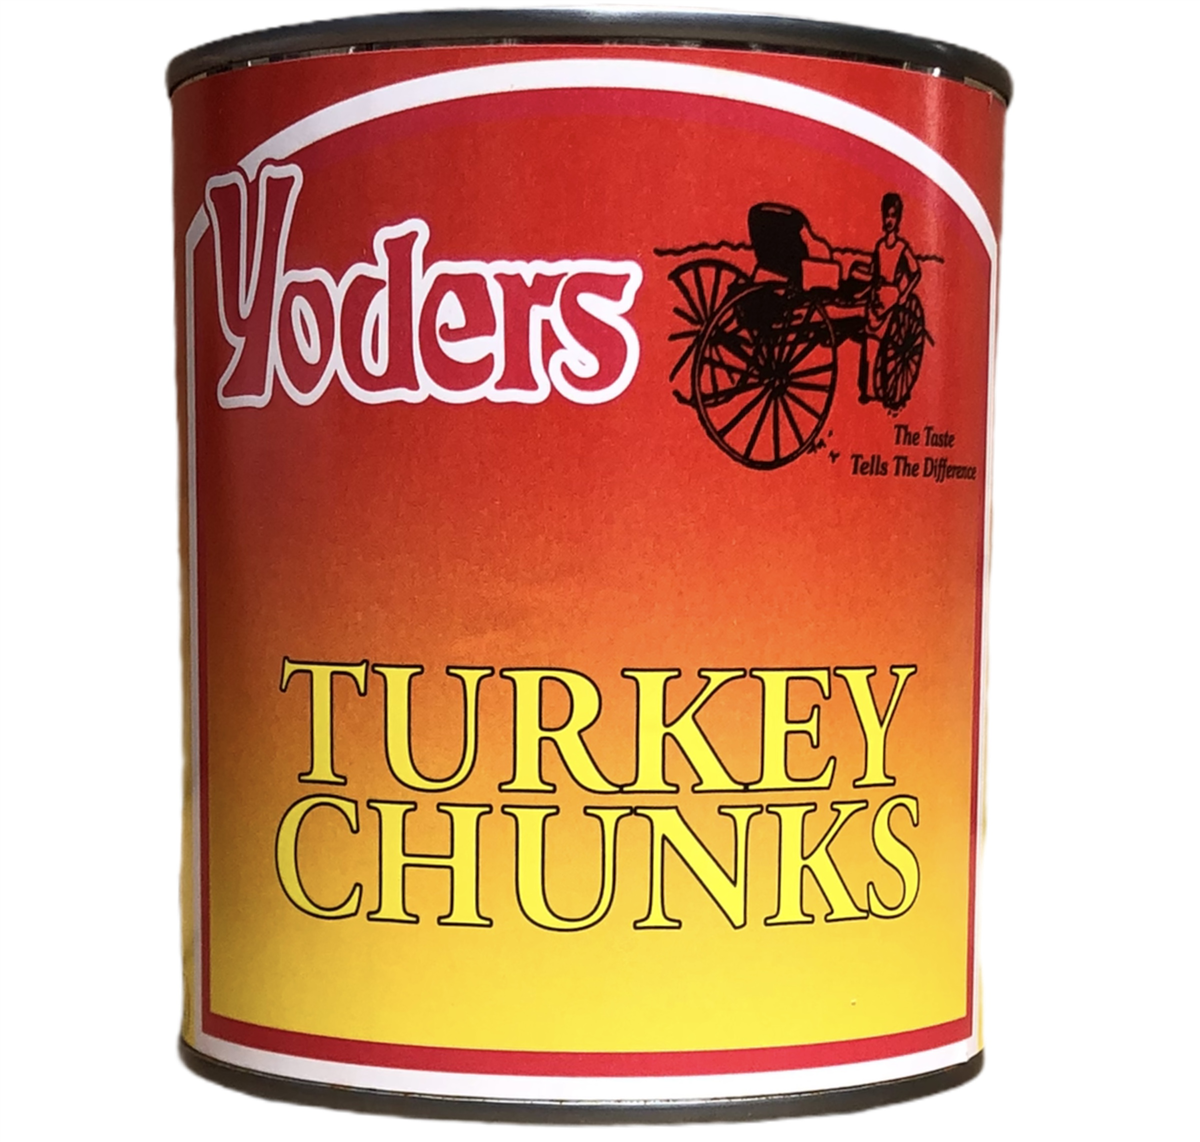 Case (12 Cans) of Yoder's fresh REAL Canned Turkey Chunks